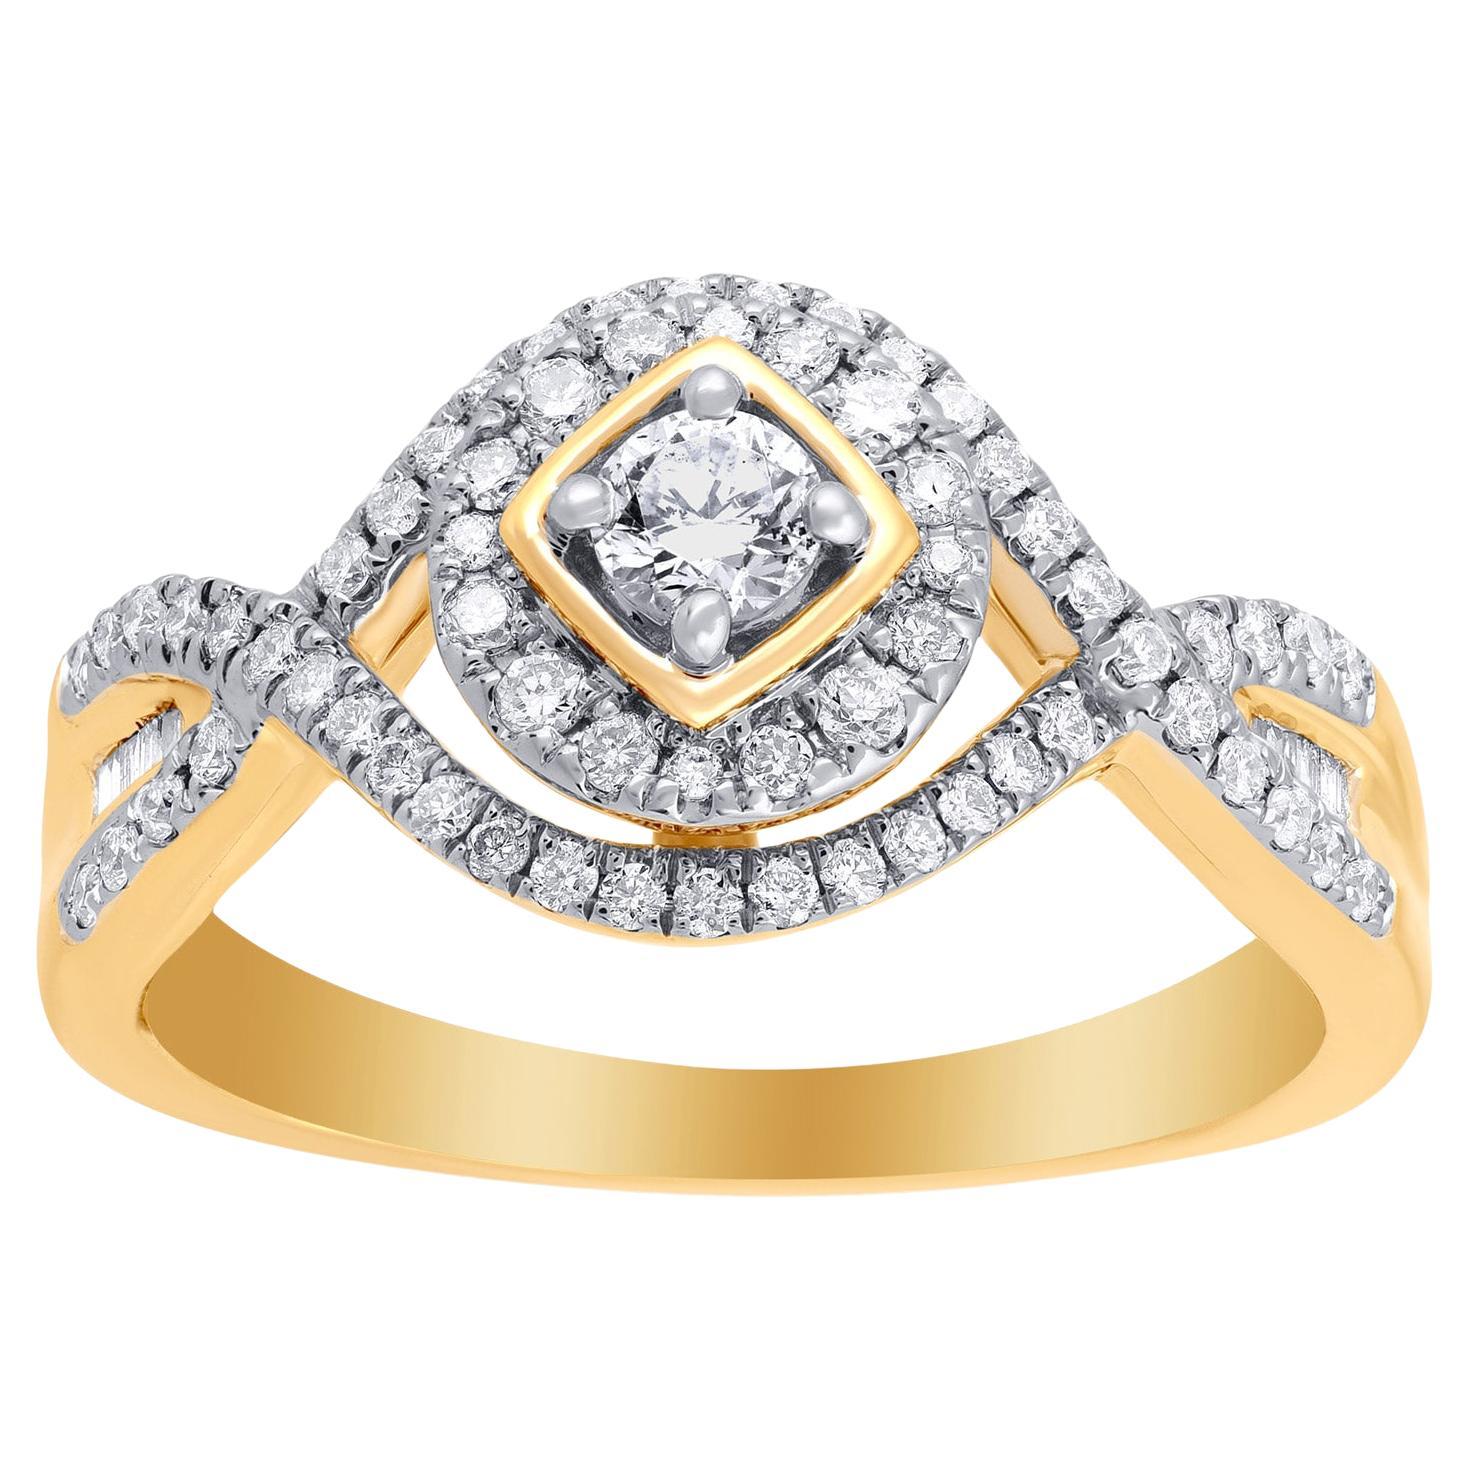 TJD 0.50 CT Round & Baguette Diamond 14KT Yellow Gold Halo Engagement Ring